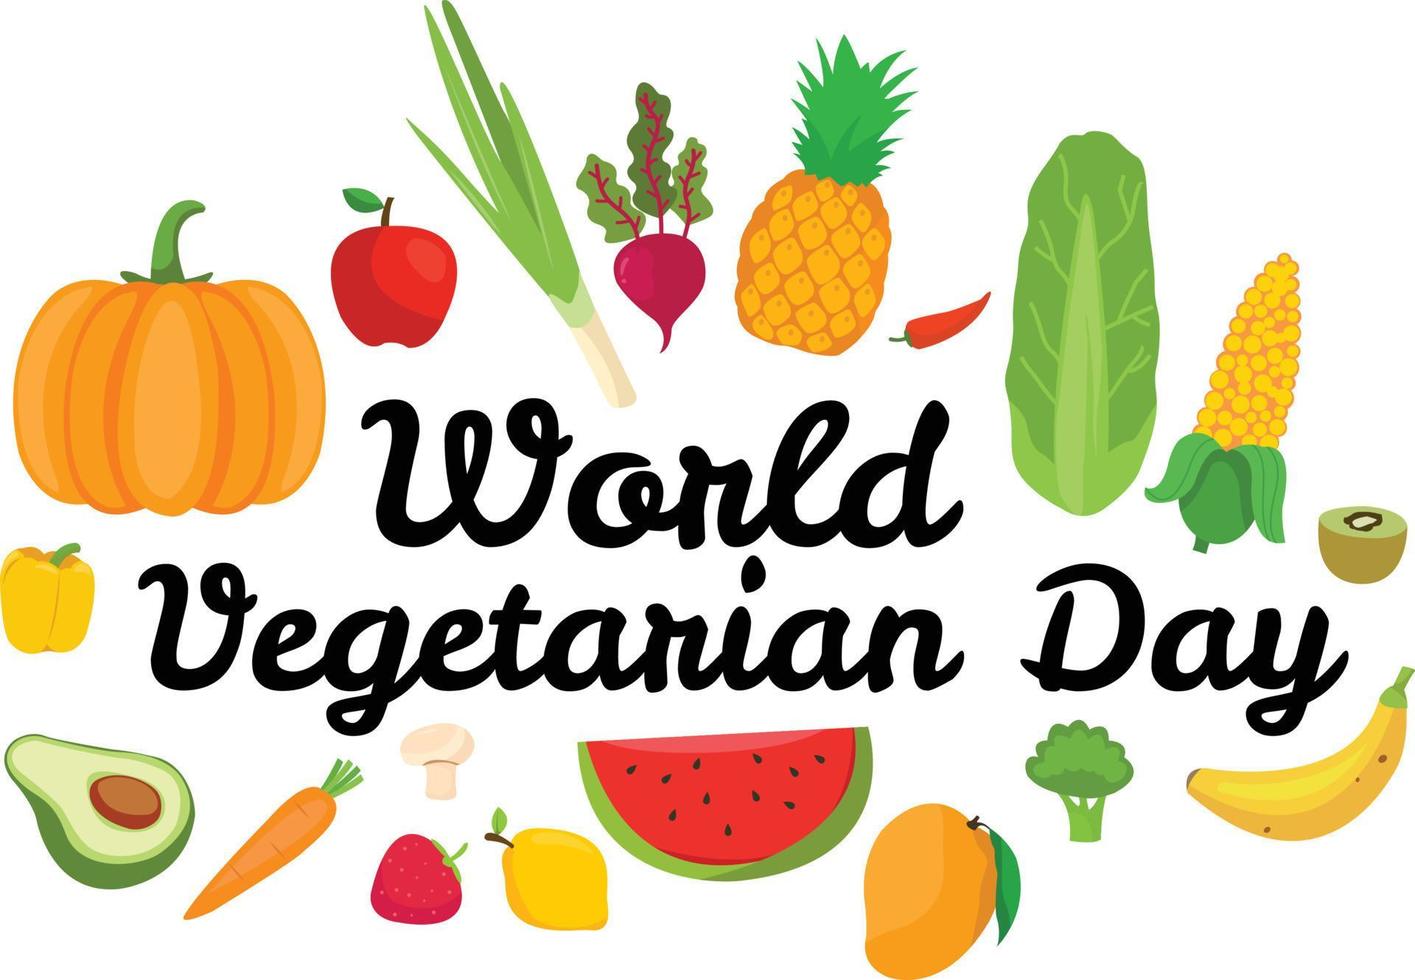 World vegetarian day with illustration of various fruits and vegetables vector